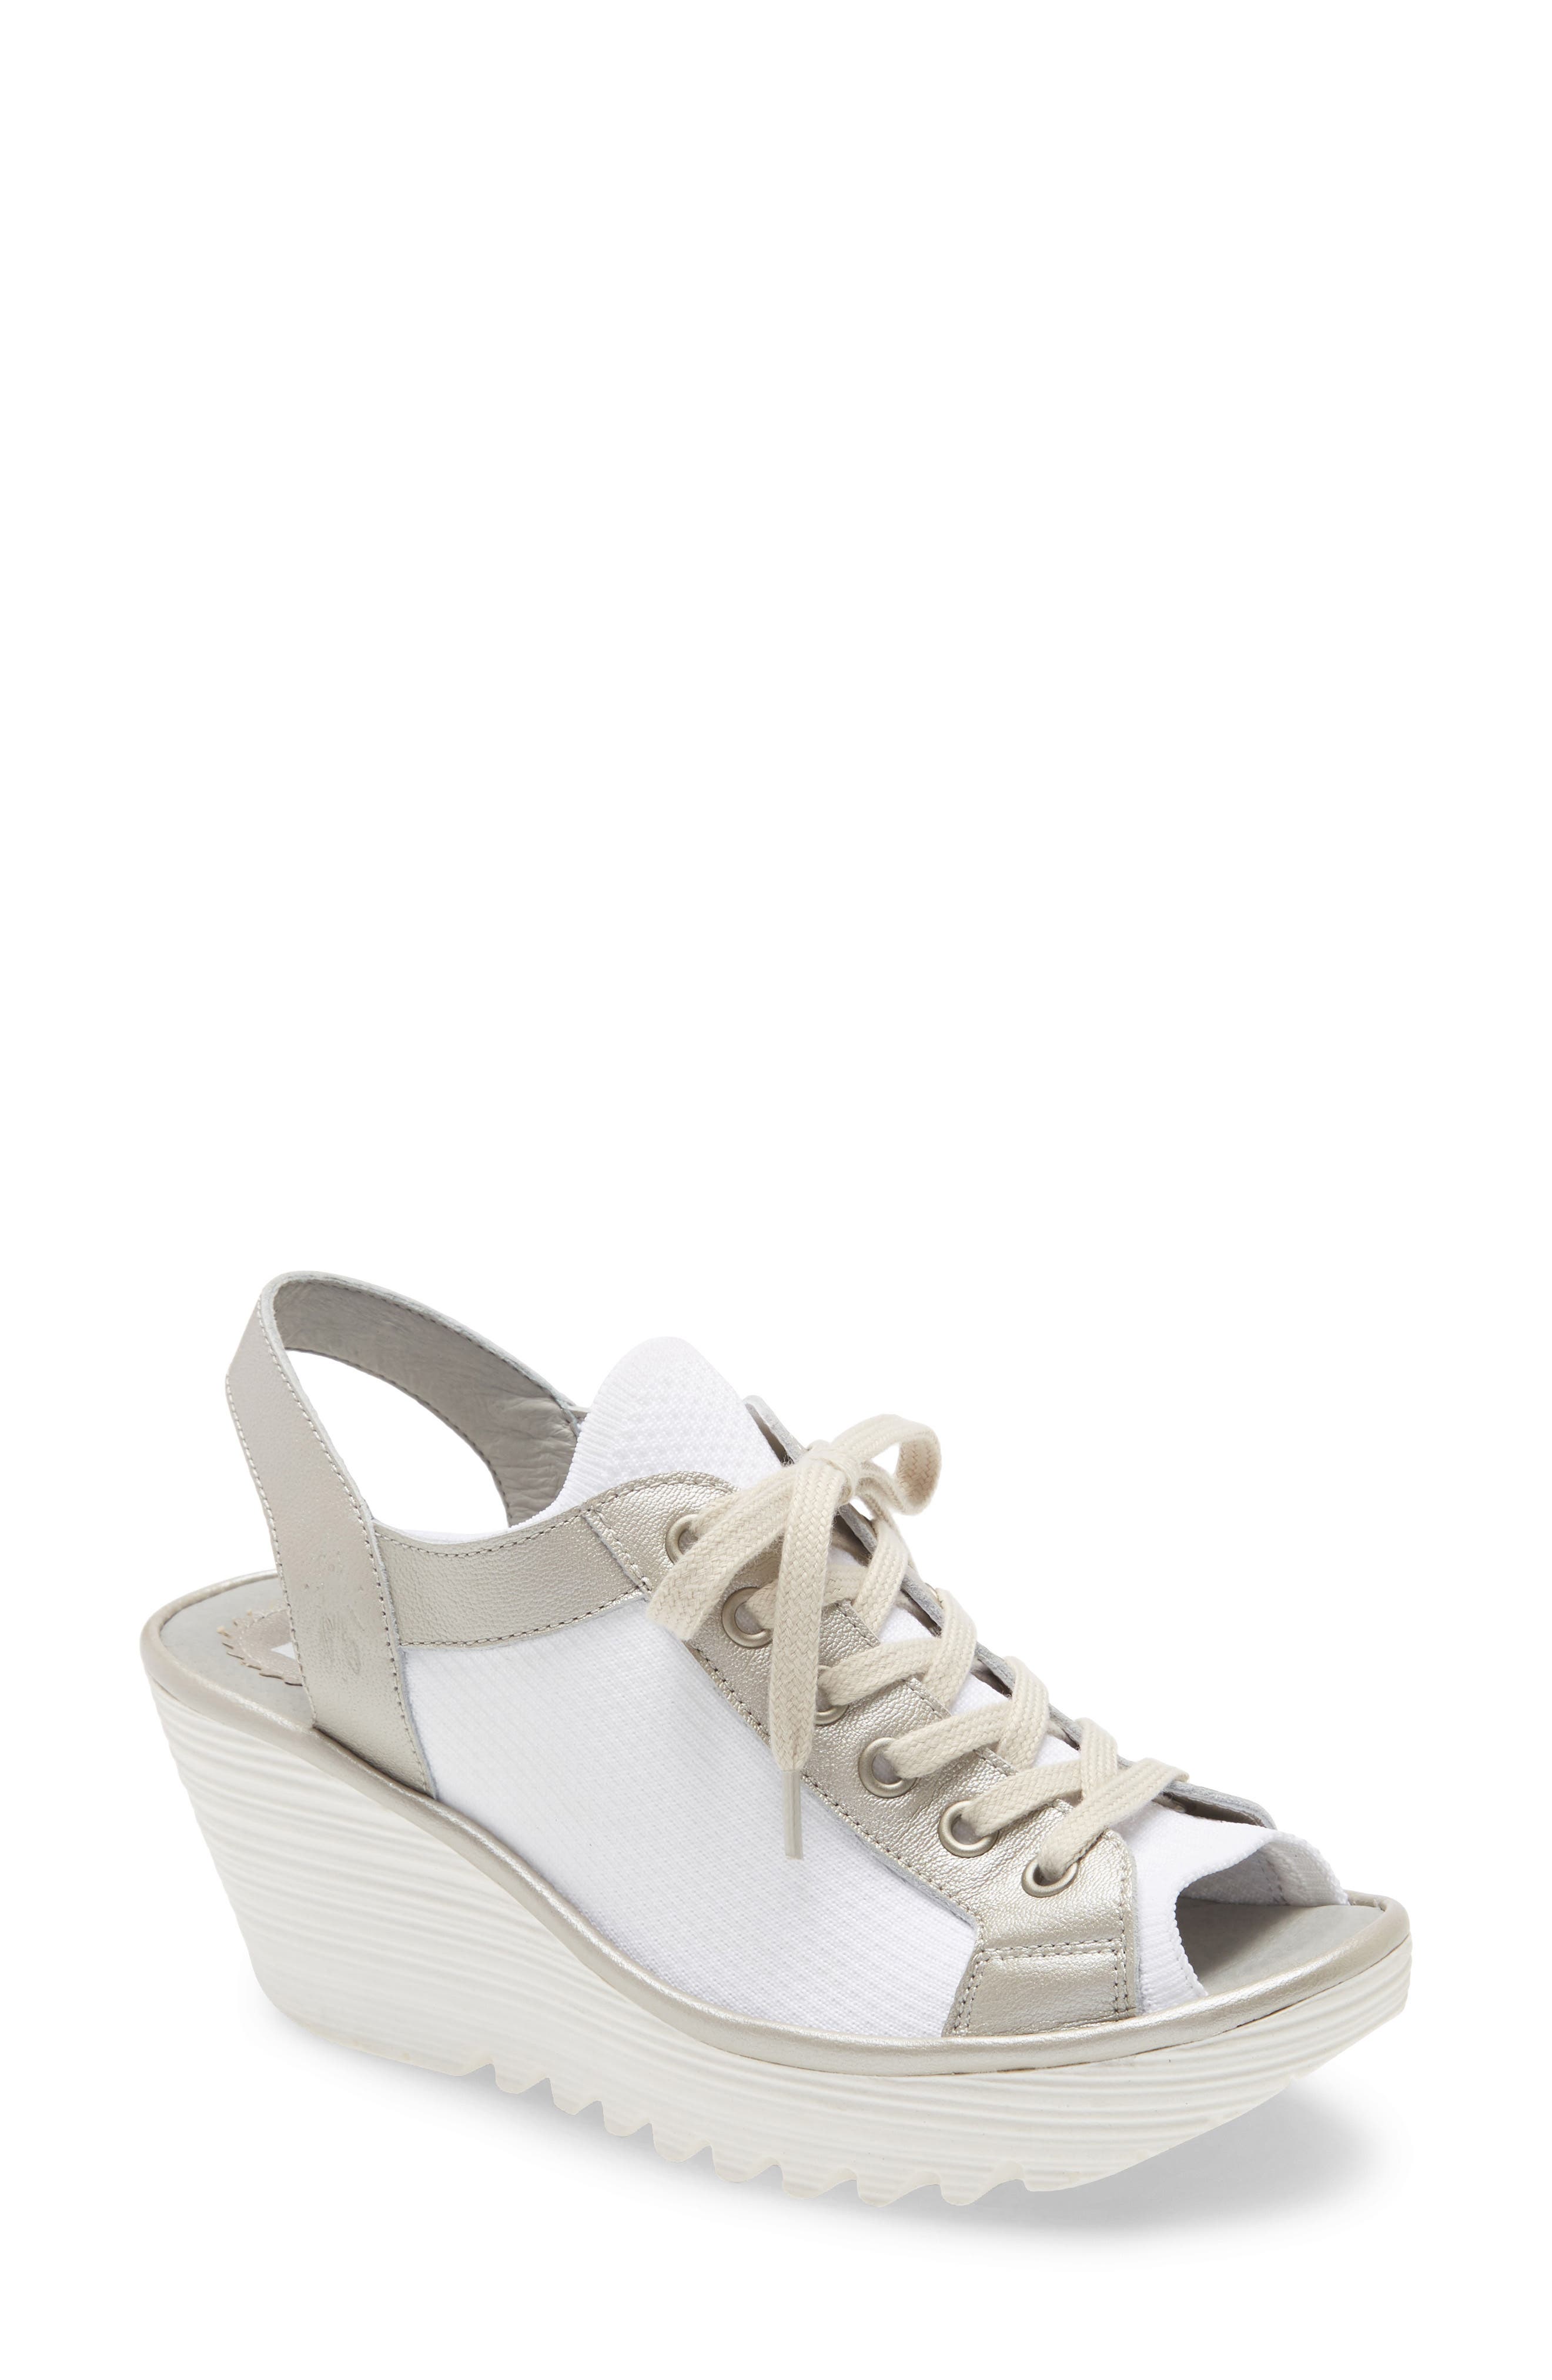 fly london white wedge sandals